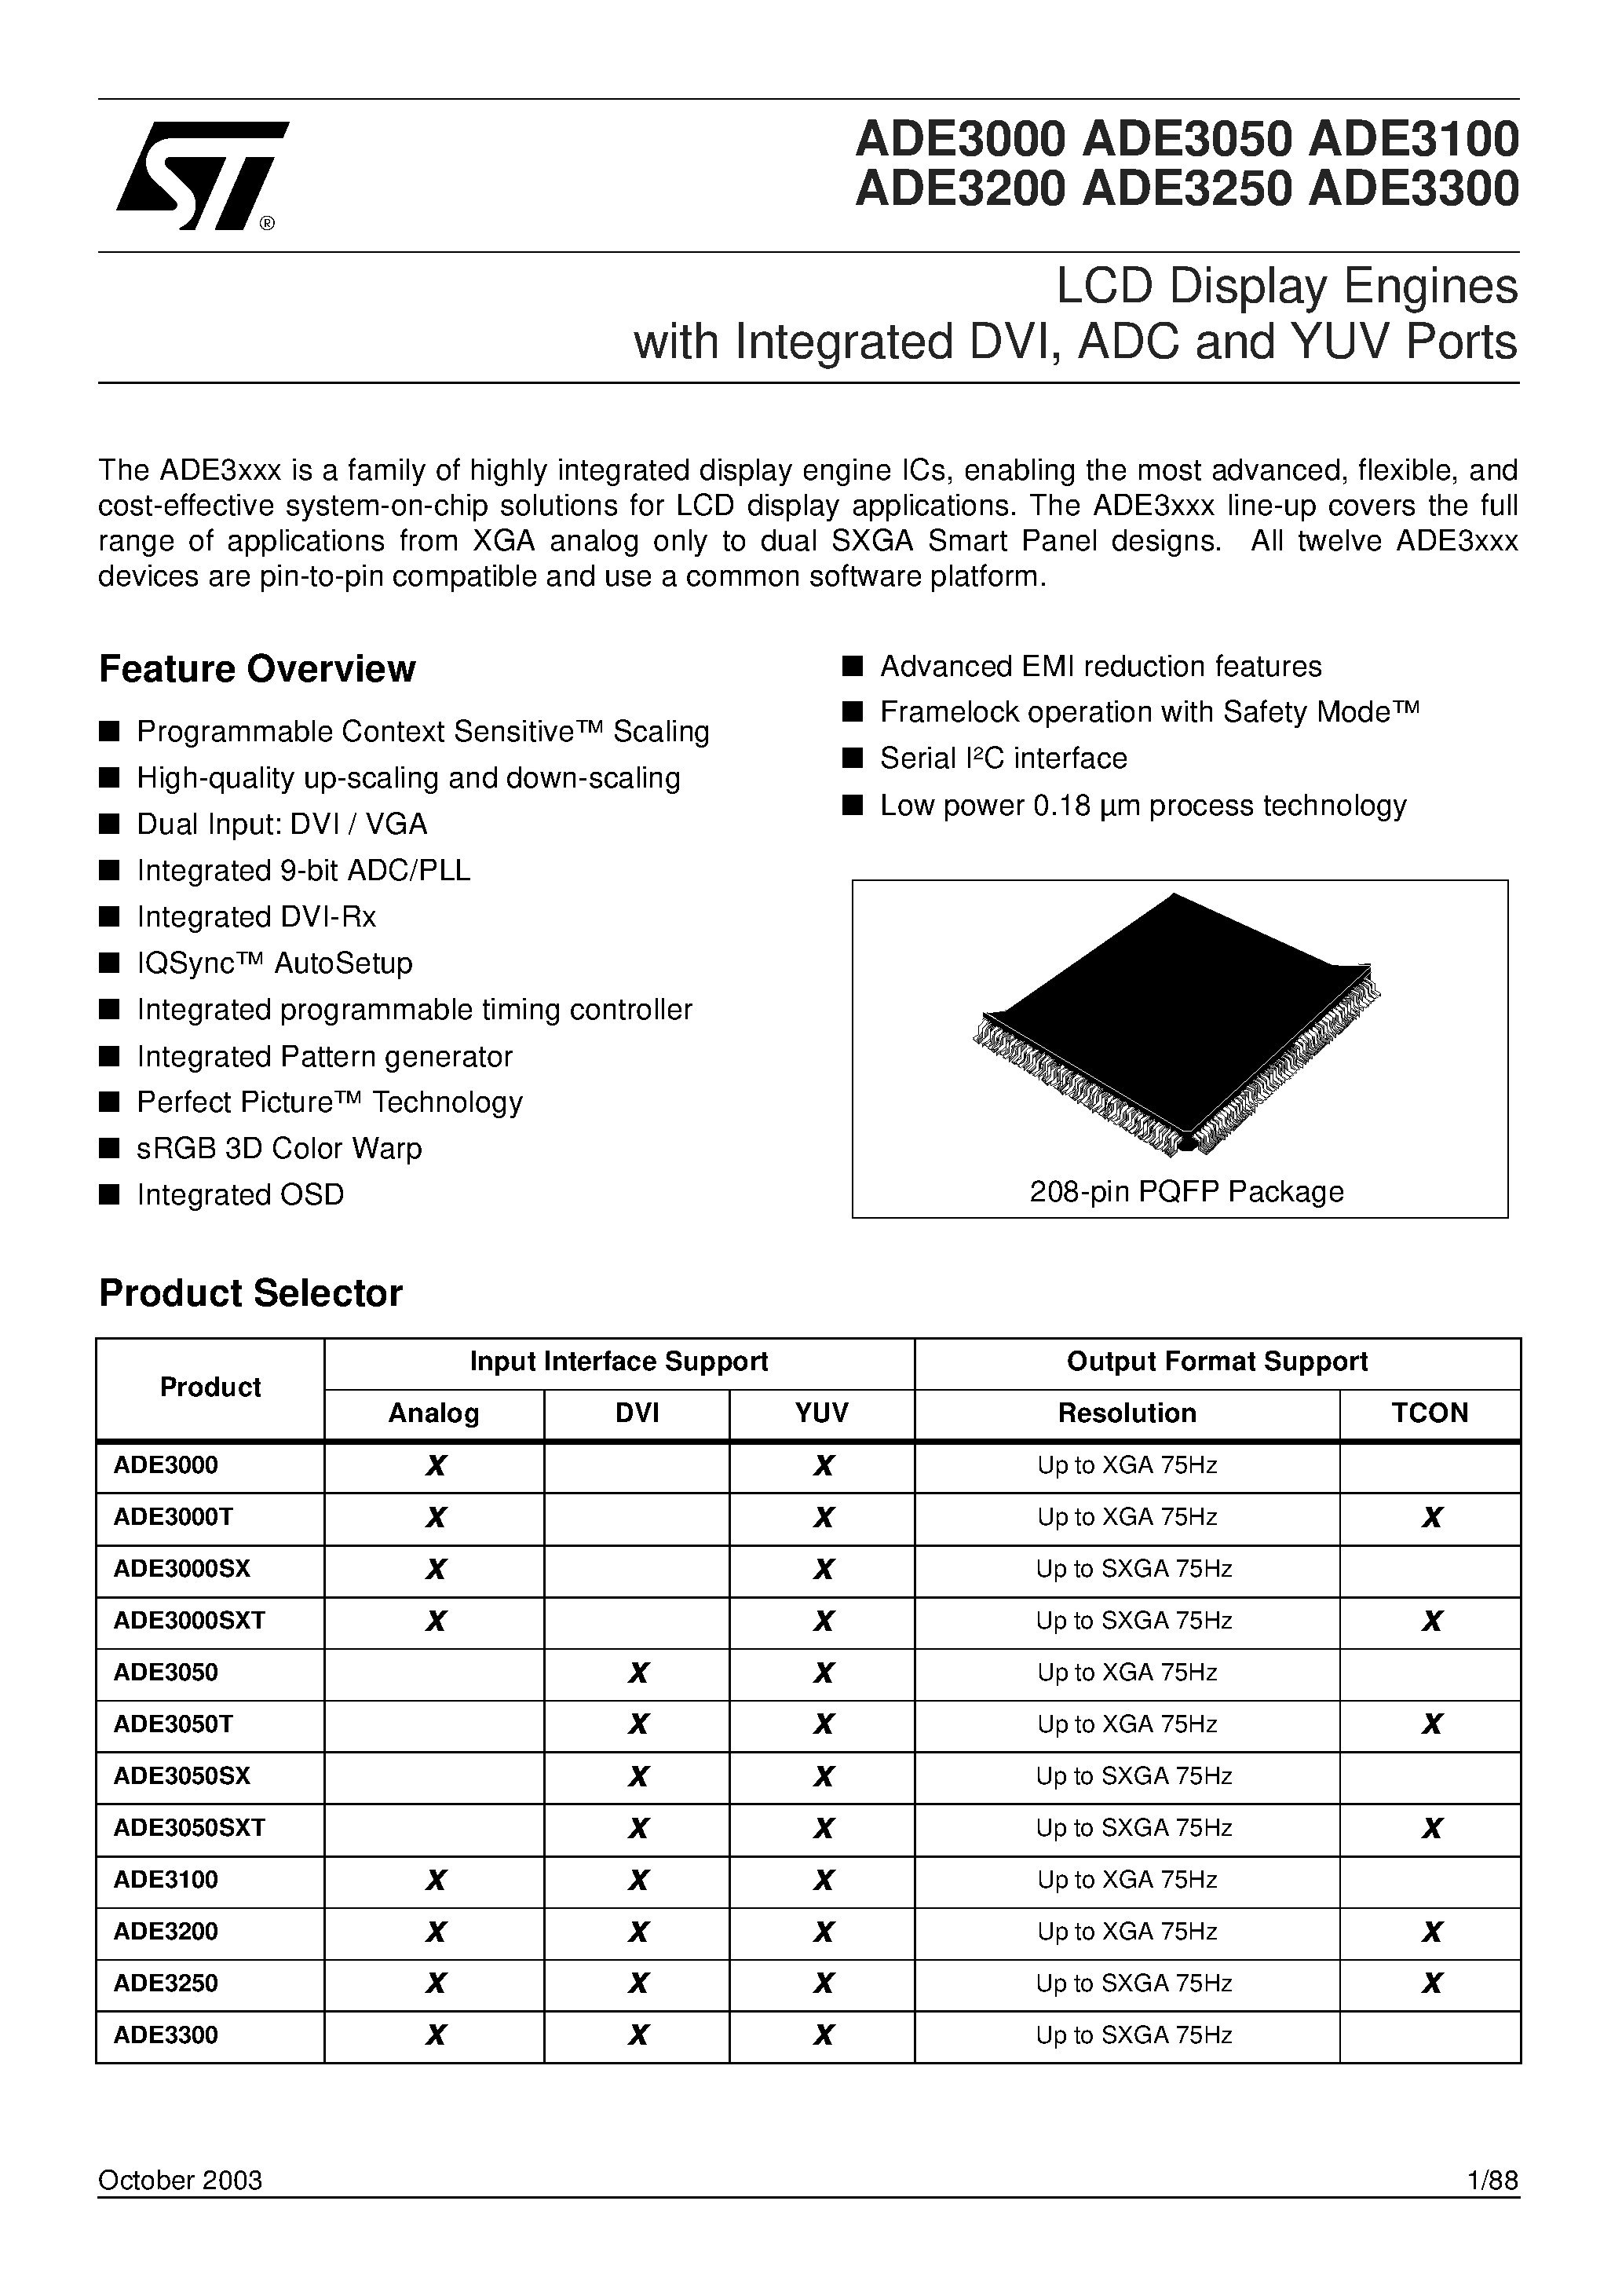 Datasheet ADE3100 - LCD Display Engines with Integrated DVI/ ADC and YUV Ports page 1